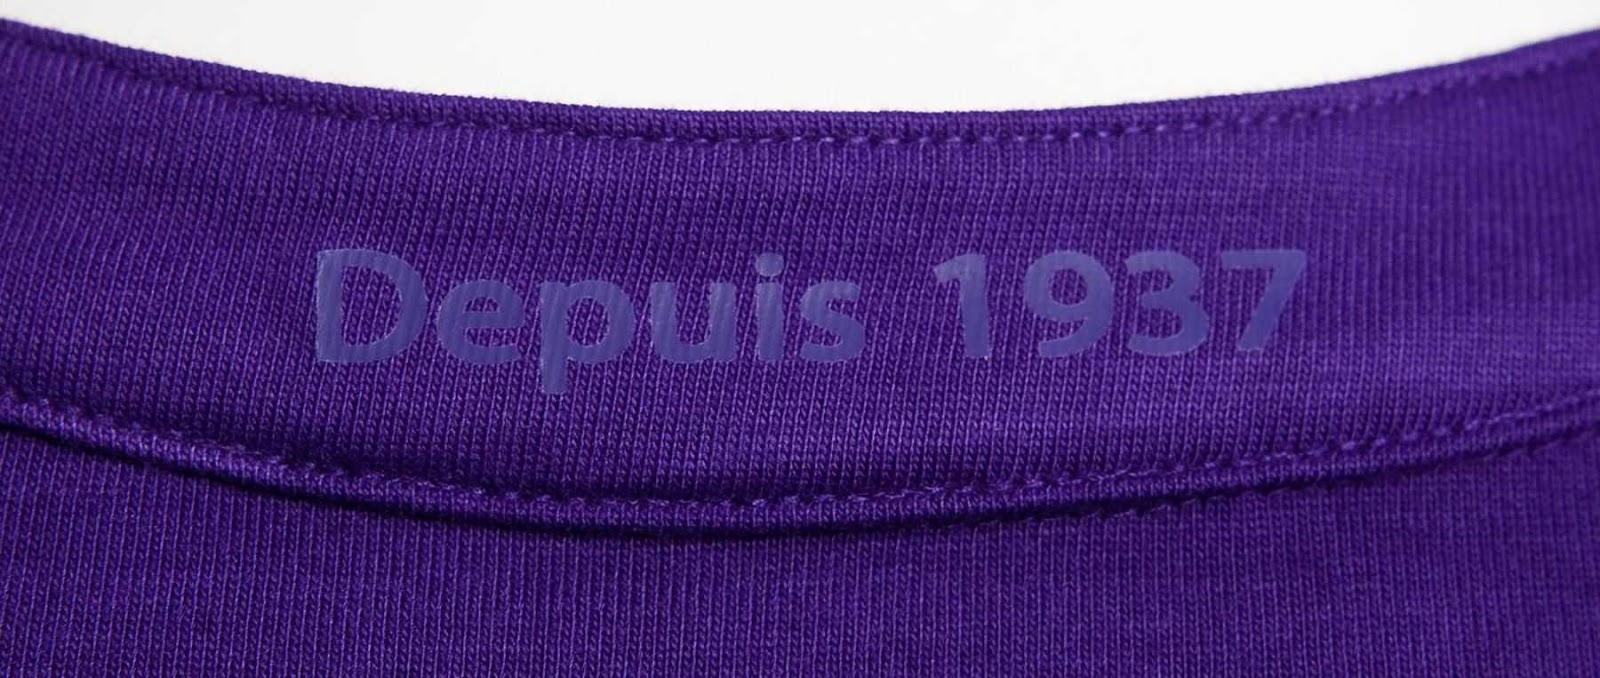 toulouse-2017-80th-anniversary-special-kit-collar-motif